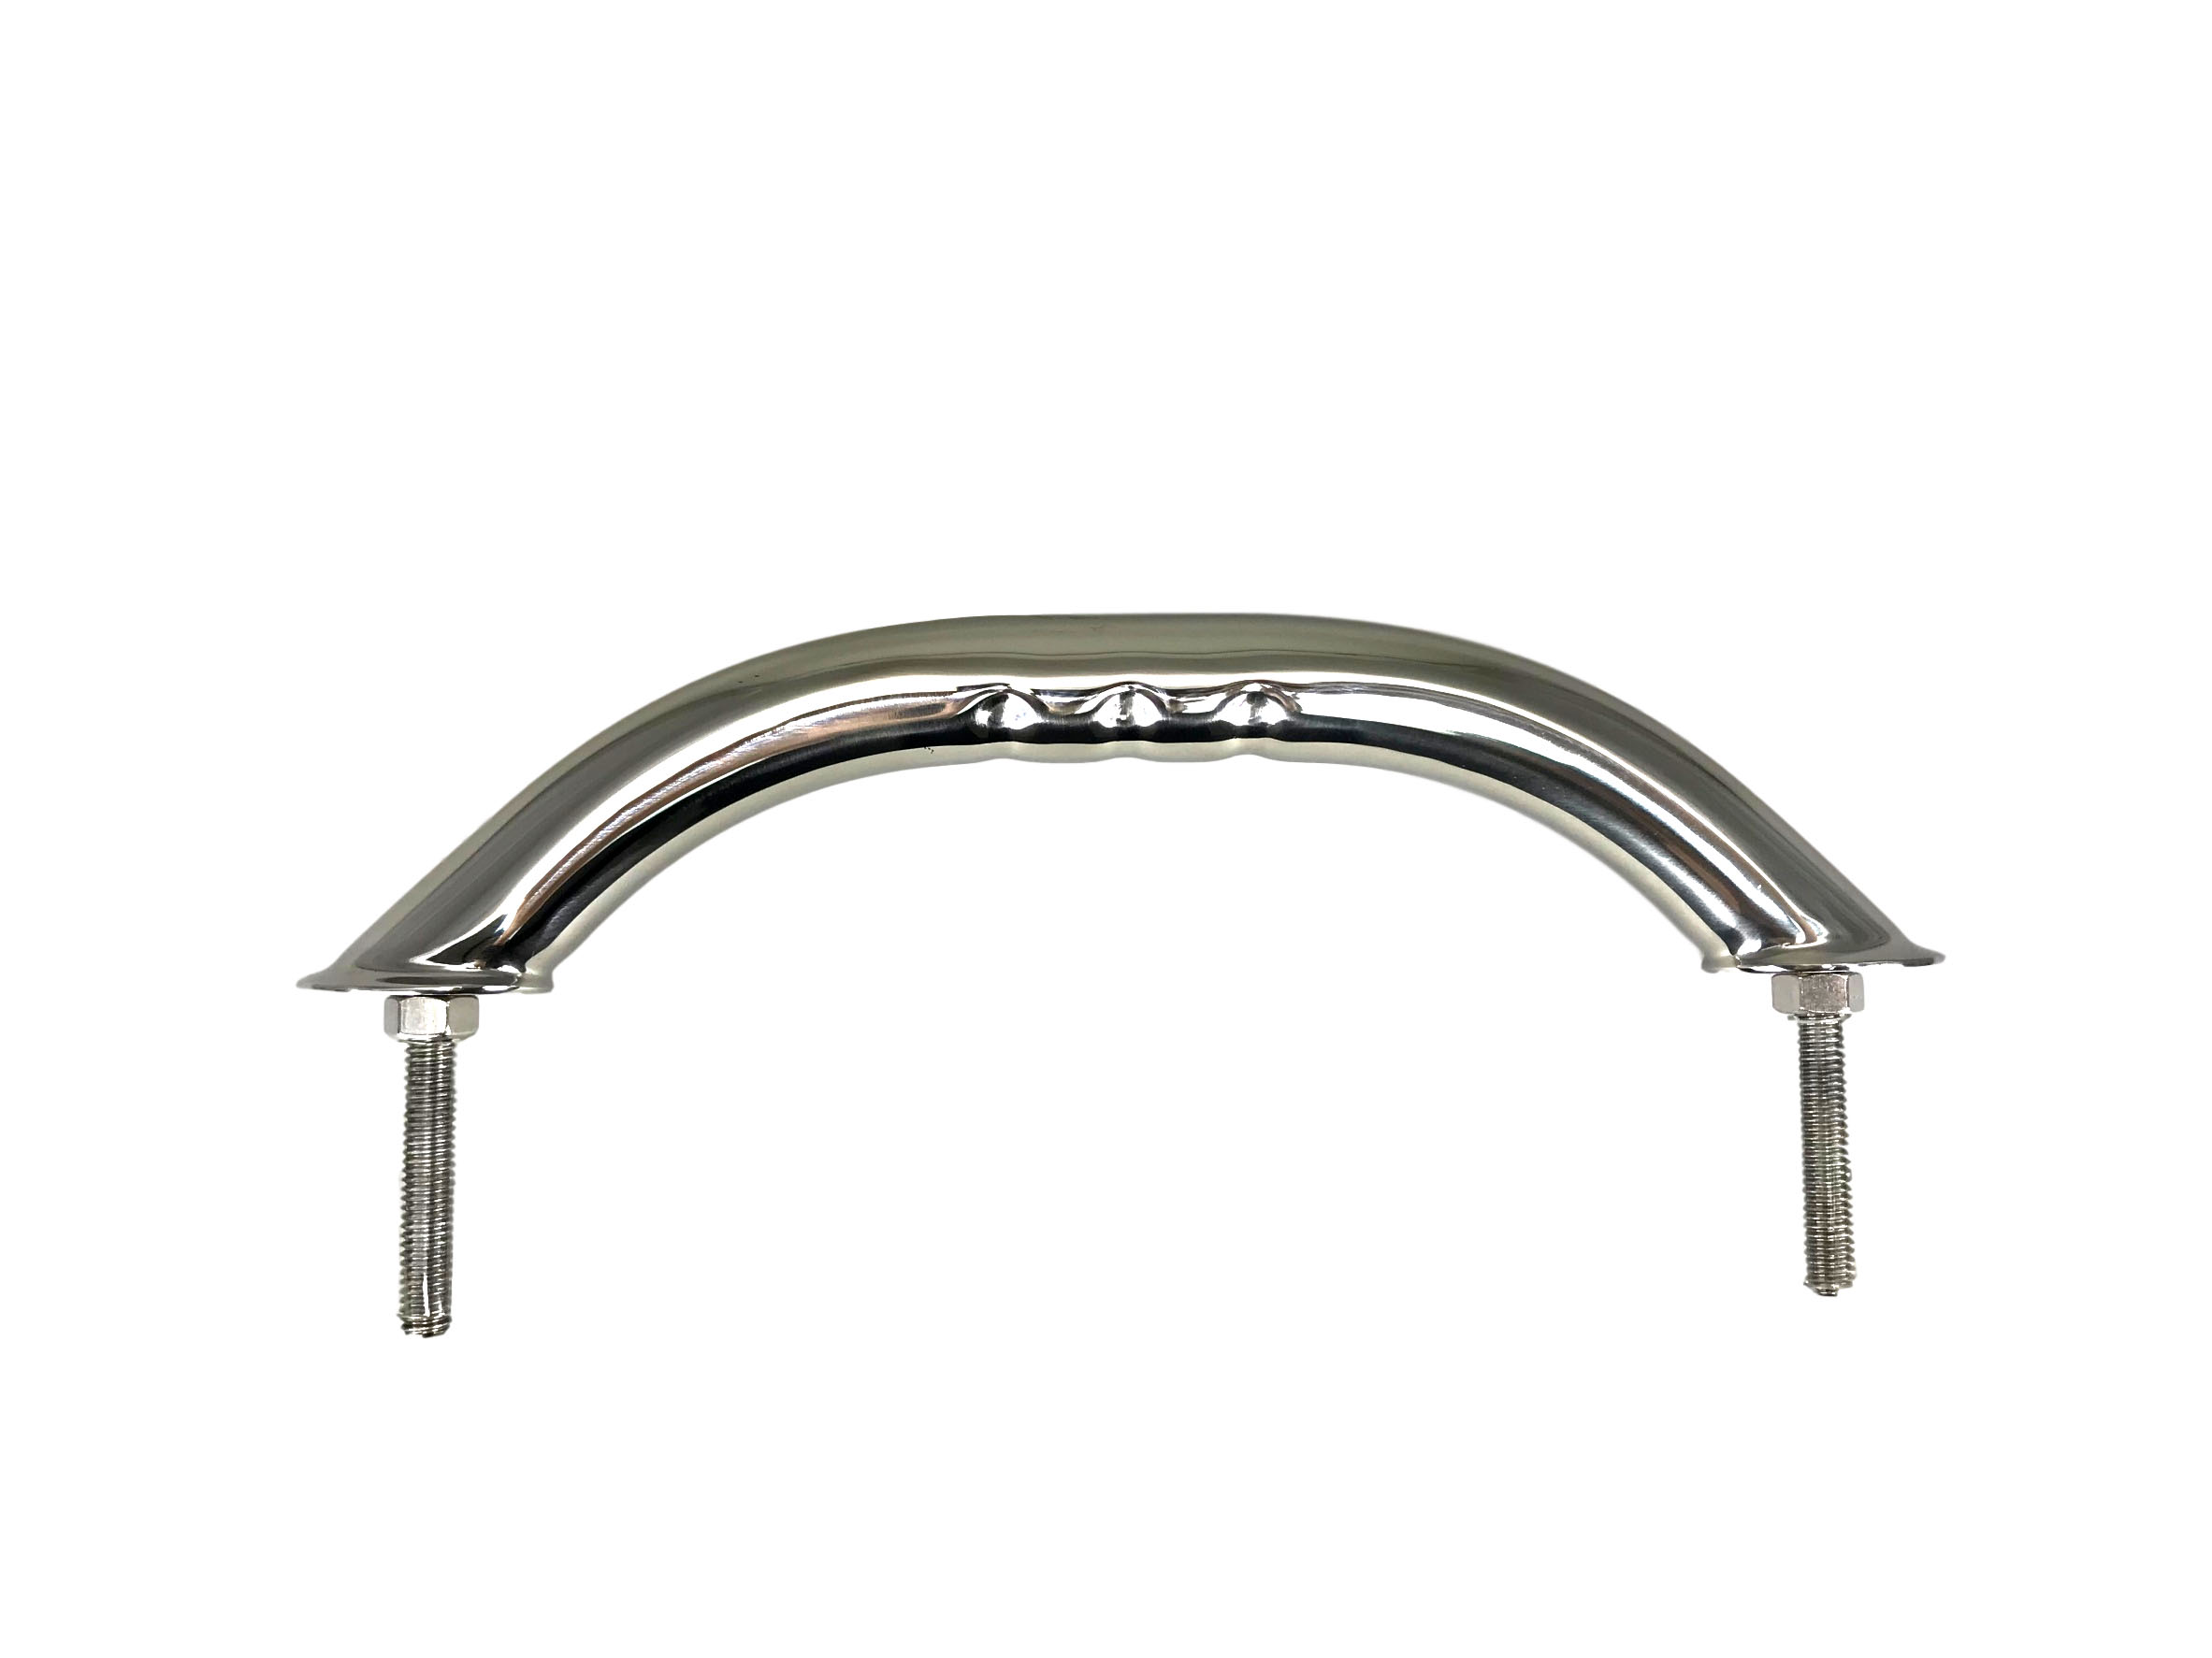 STAINLESS STEEL MARINE BOAT HANDRAIL 8-5/8 INCHES WITH WAVE CURVE